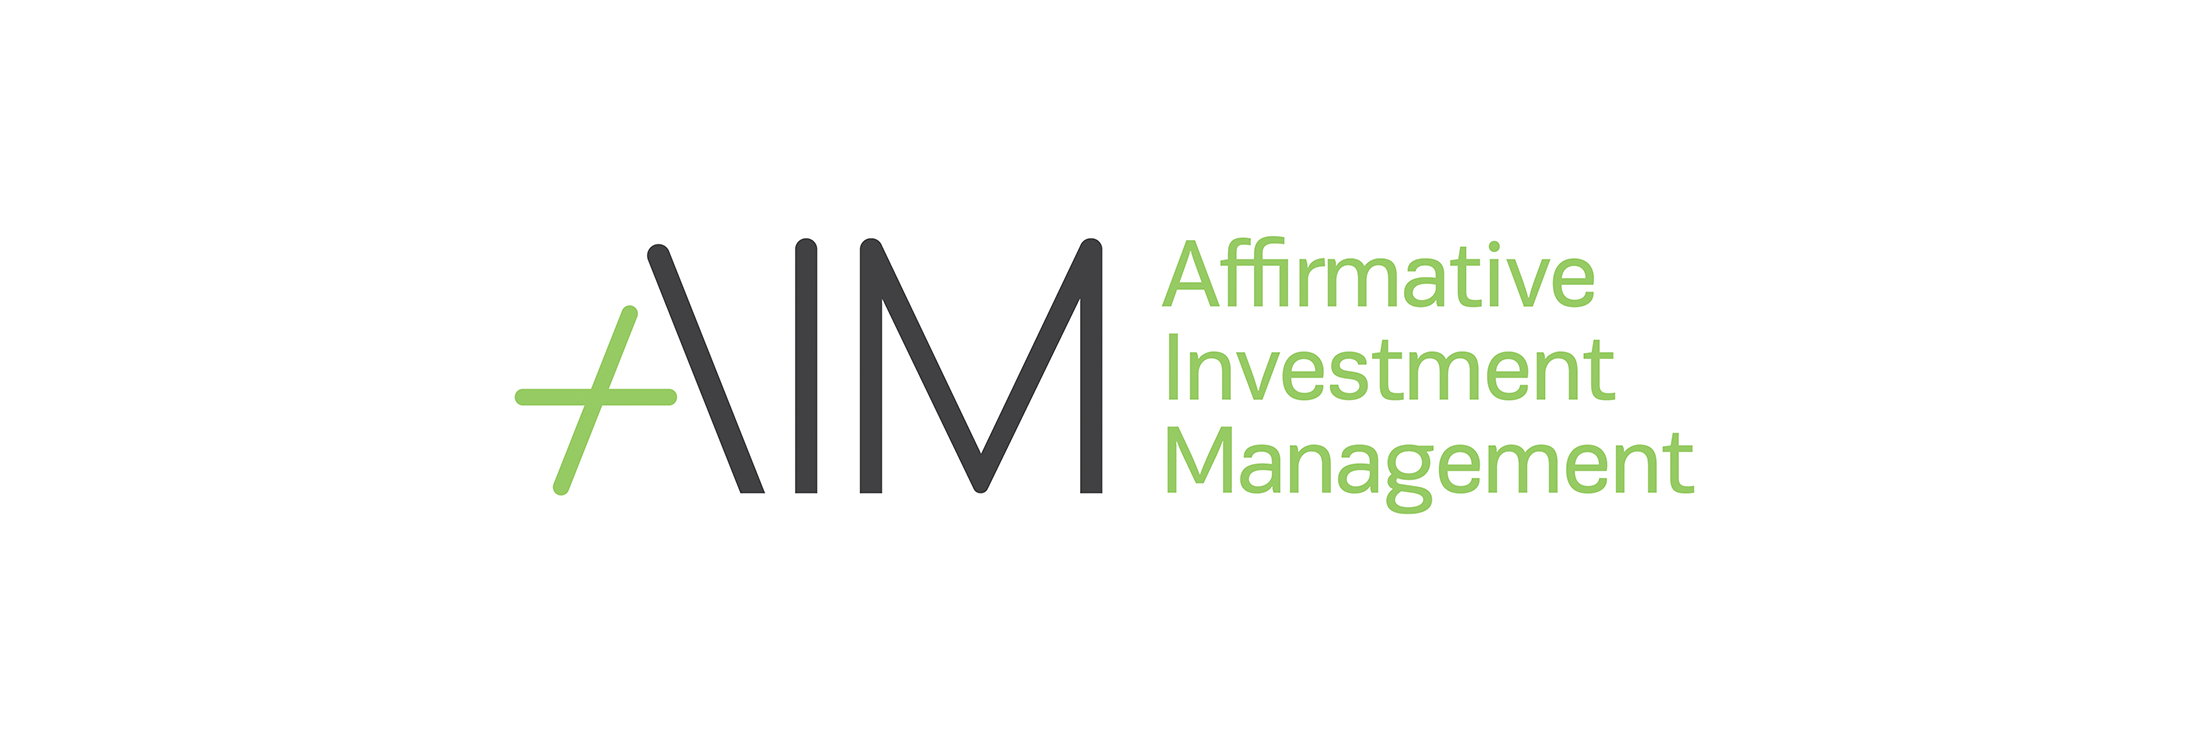 AIM’s Impact Reporting wins at the Environmental Finance  Sustainable Investment Awards